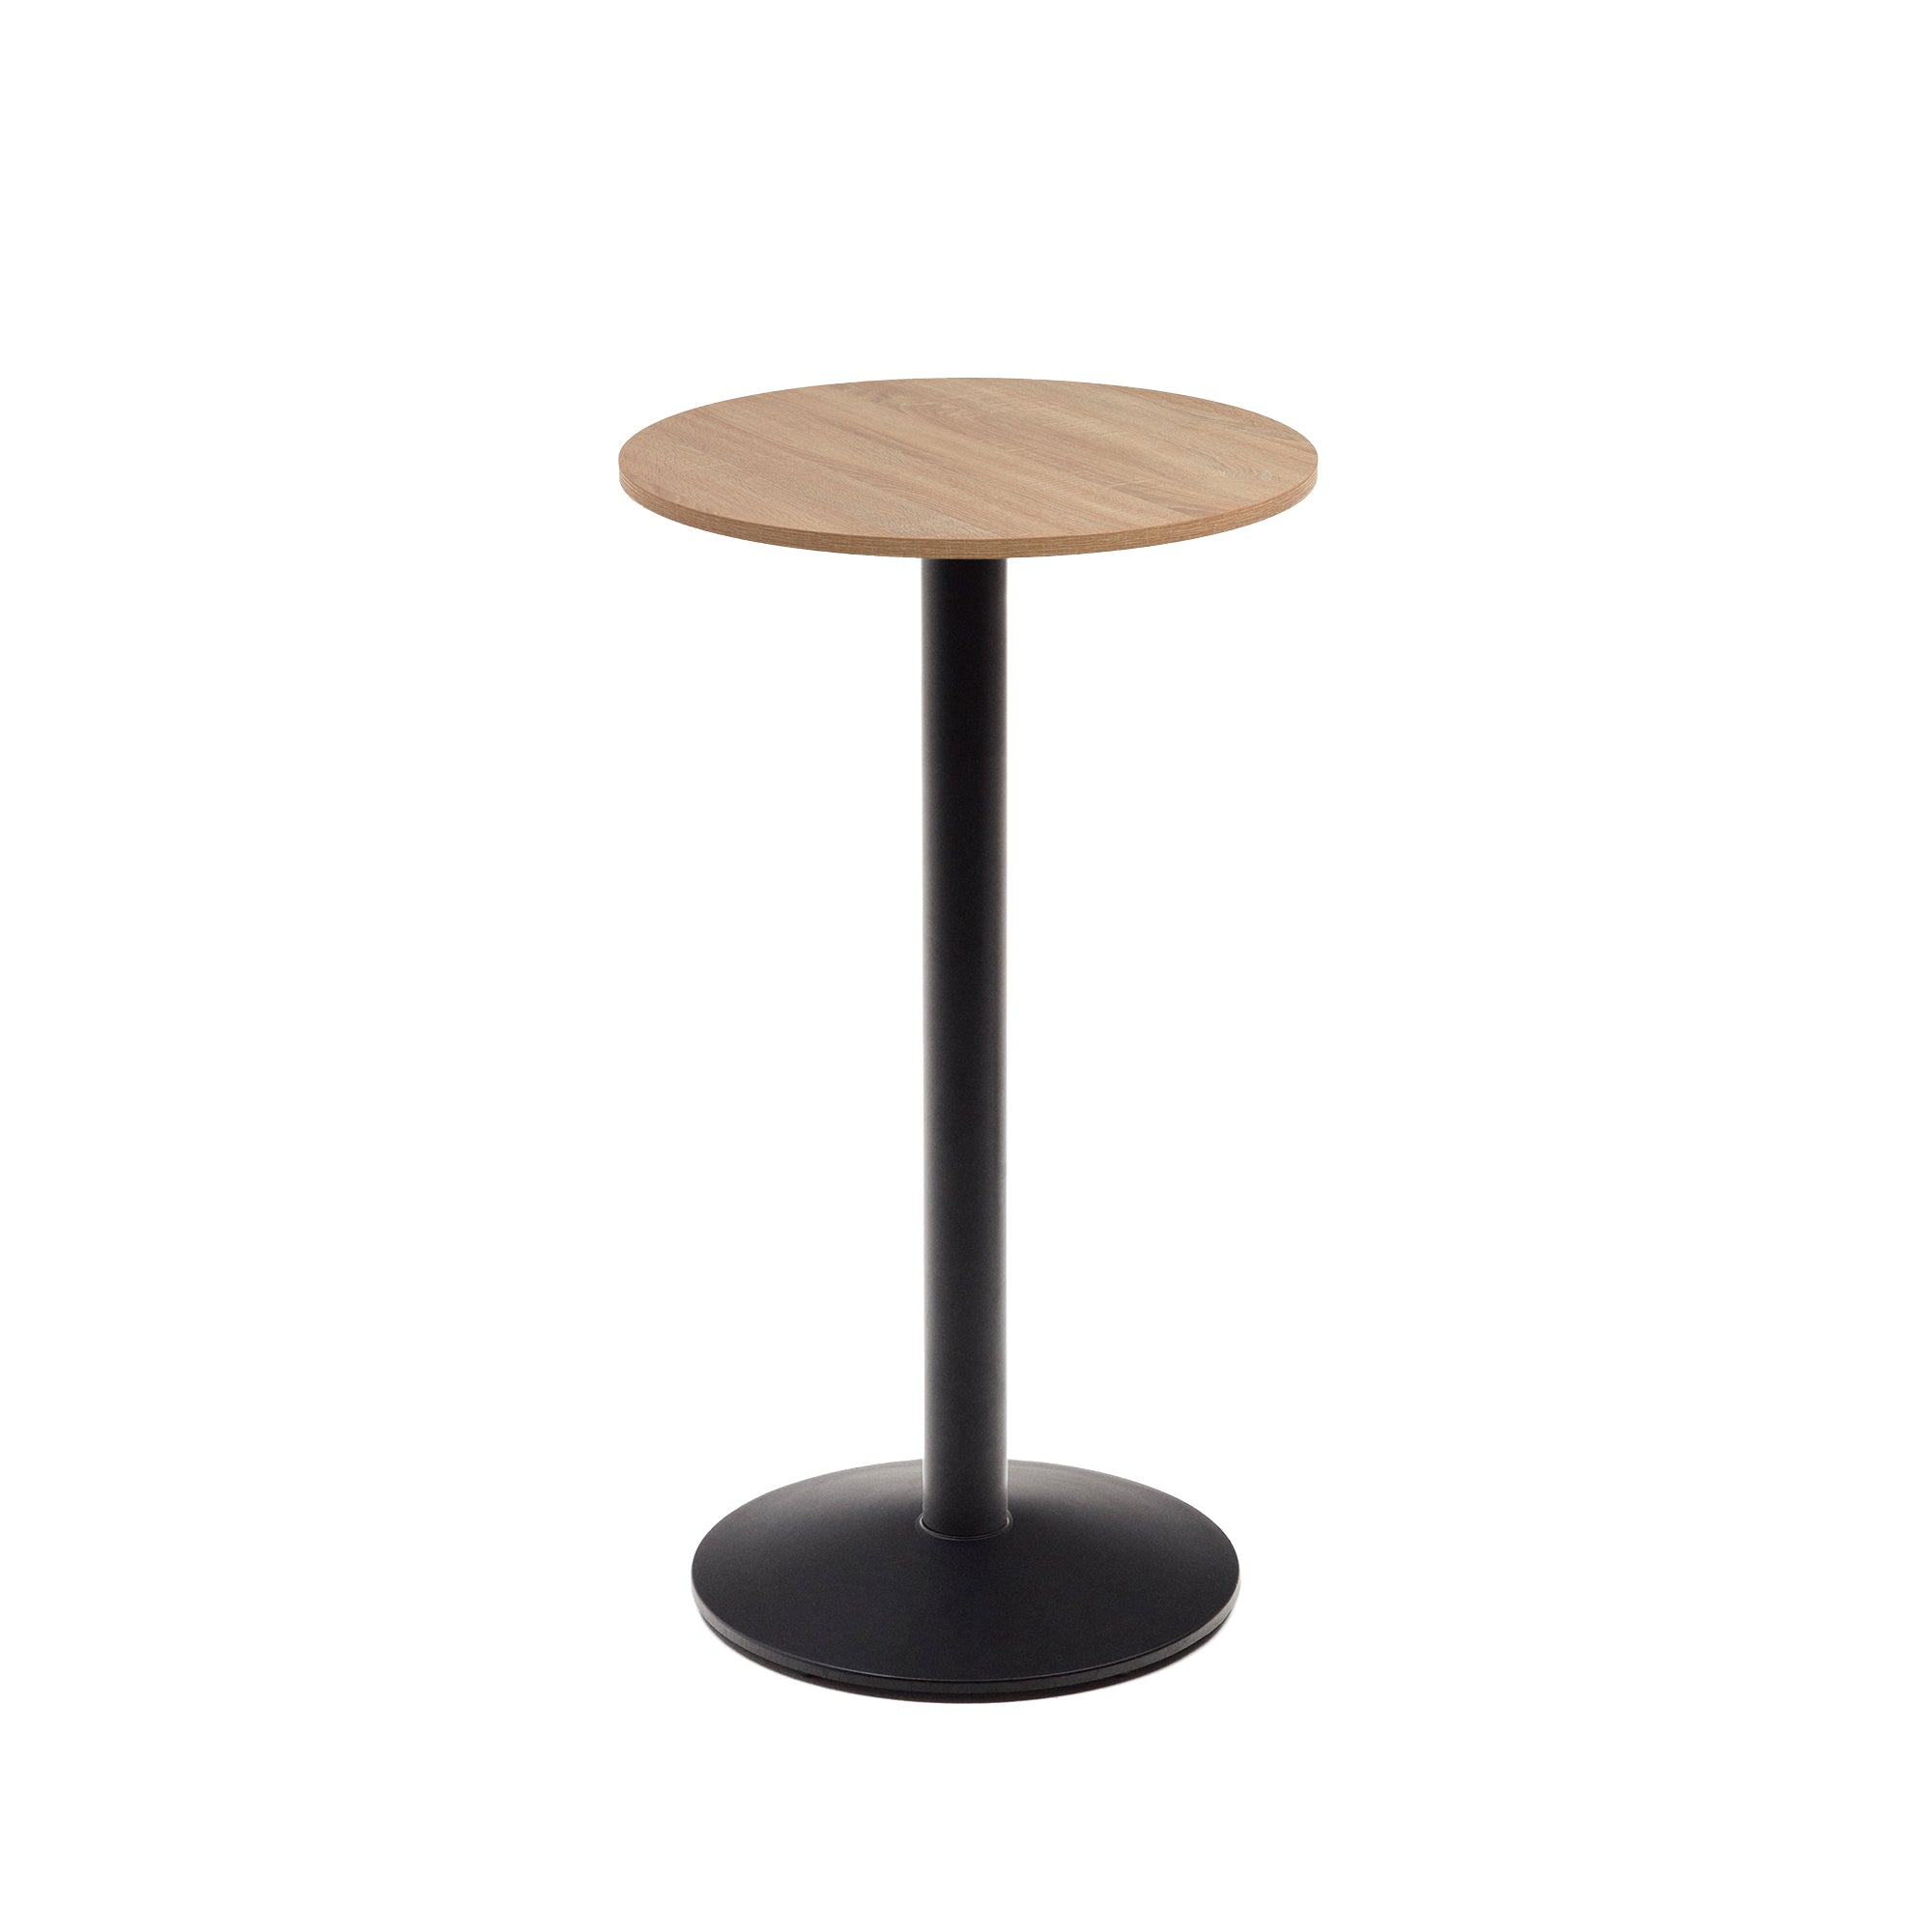 Esilda high round table in natural finish melamine with metal leg in a painted black finish, Ø60x96cm